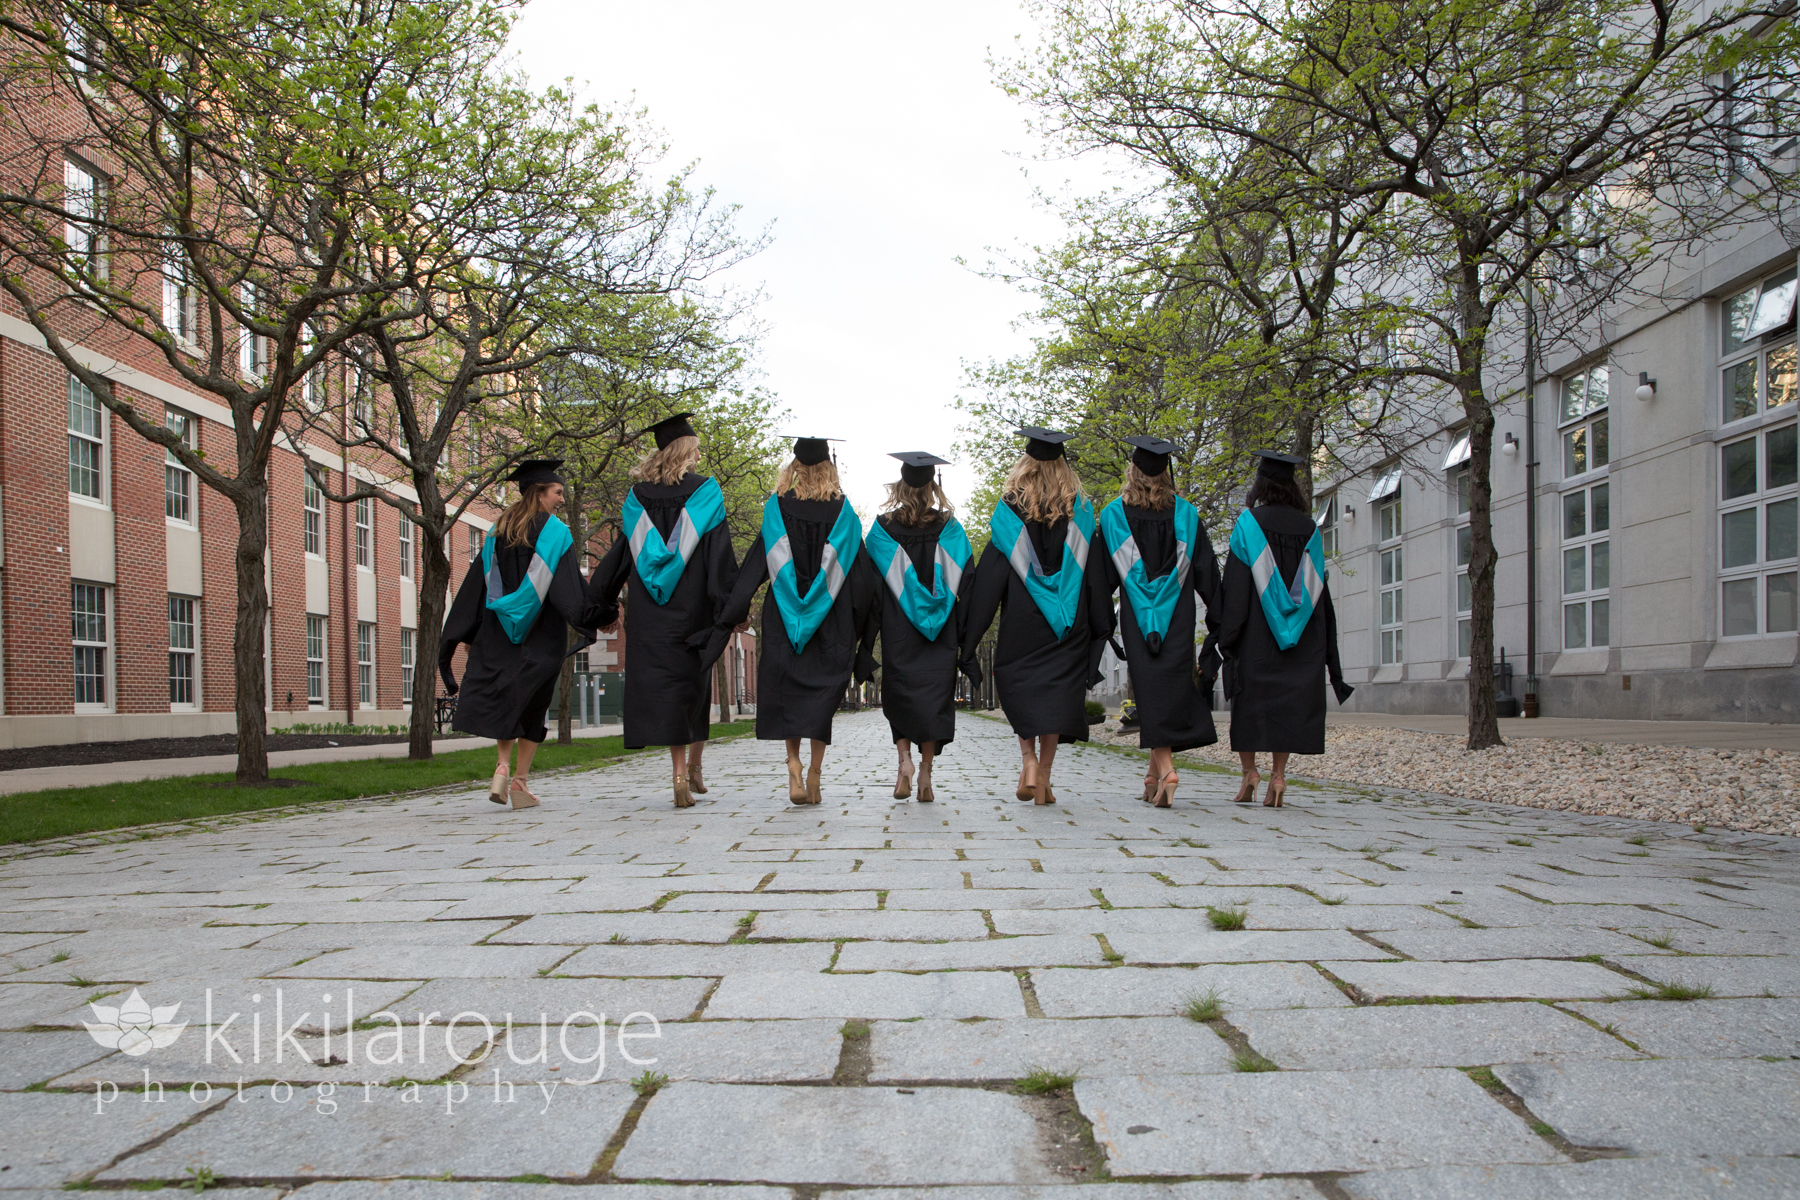 Seven grads in cap and gown walking on cobblestone street